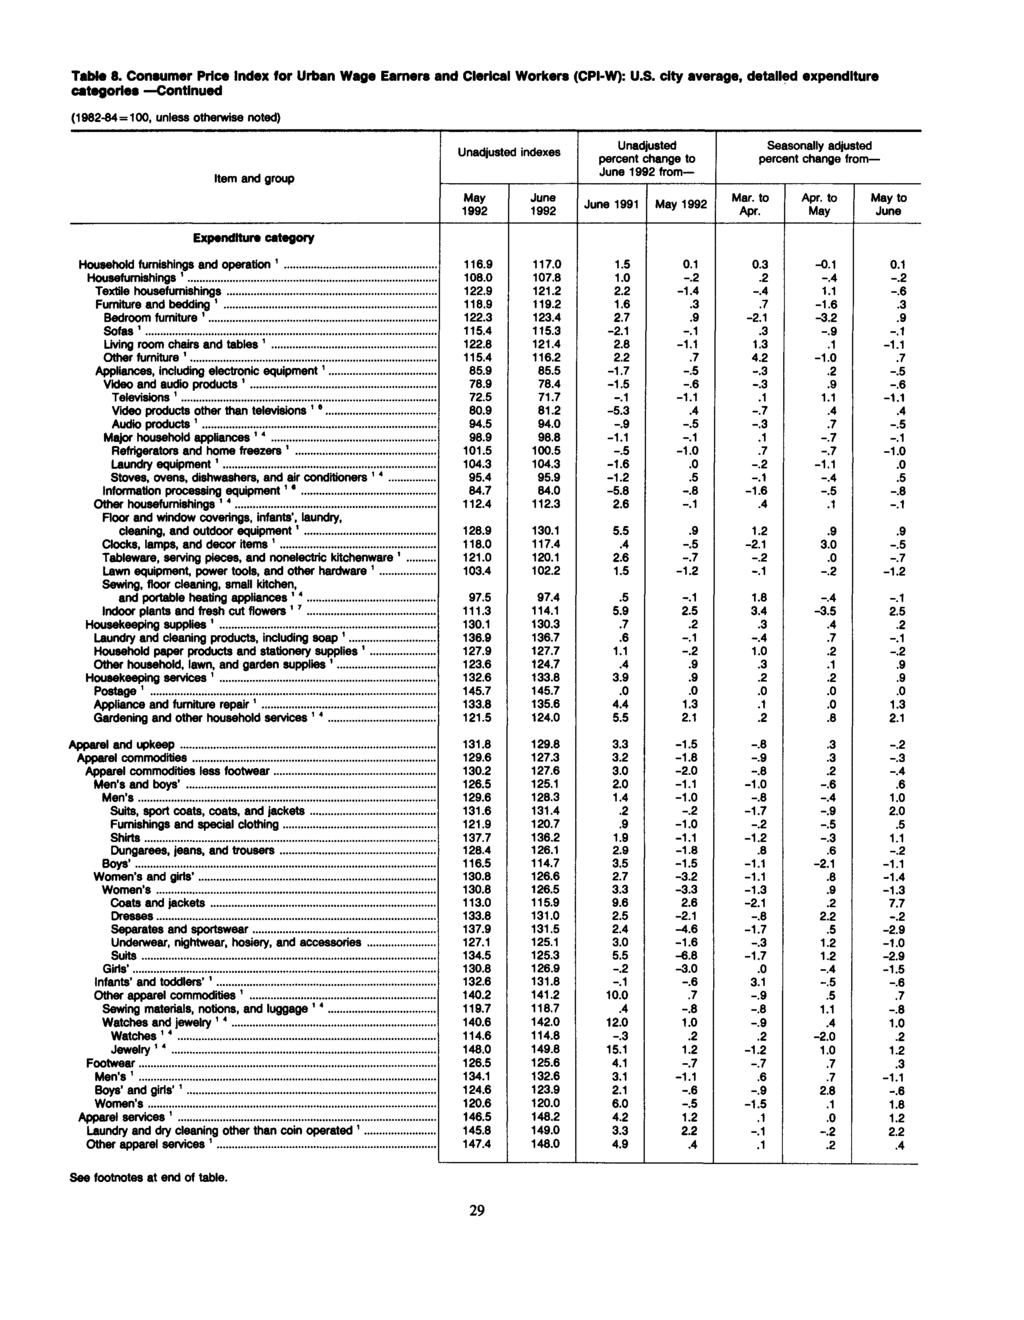 Table 8. Consumer Price for Urban Wage Earners and Clerical Workers (CPI-W): U.S. city average, detailed expenditure categories Continued Item and group Unadjusted indexes Unadjusted percent to Mar.